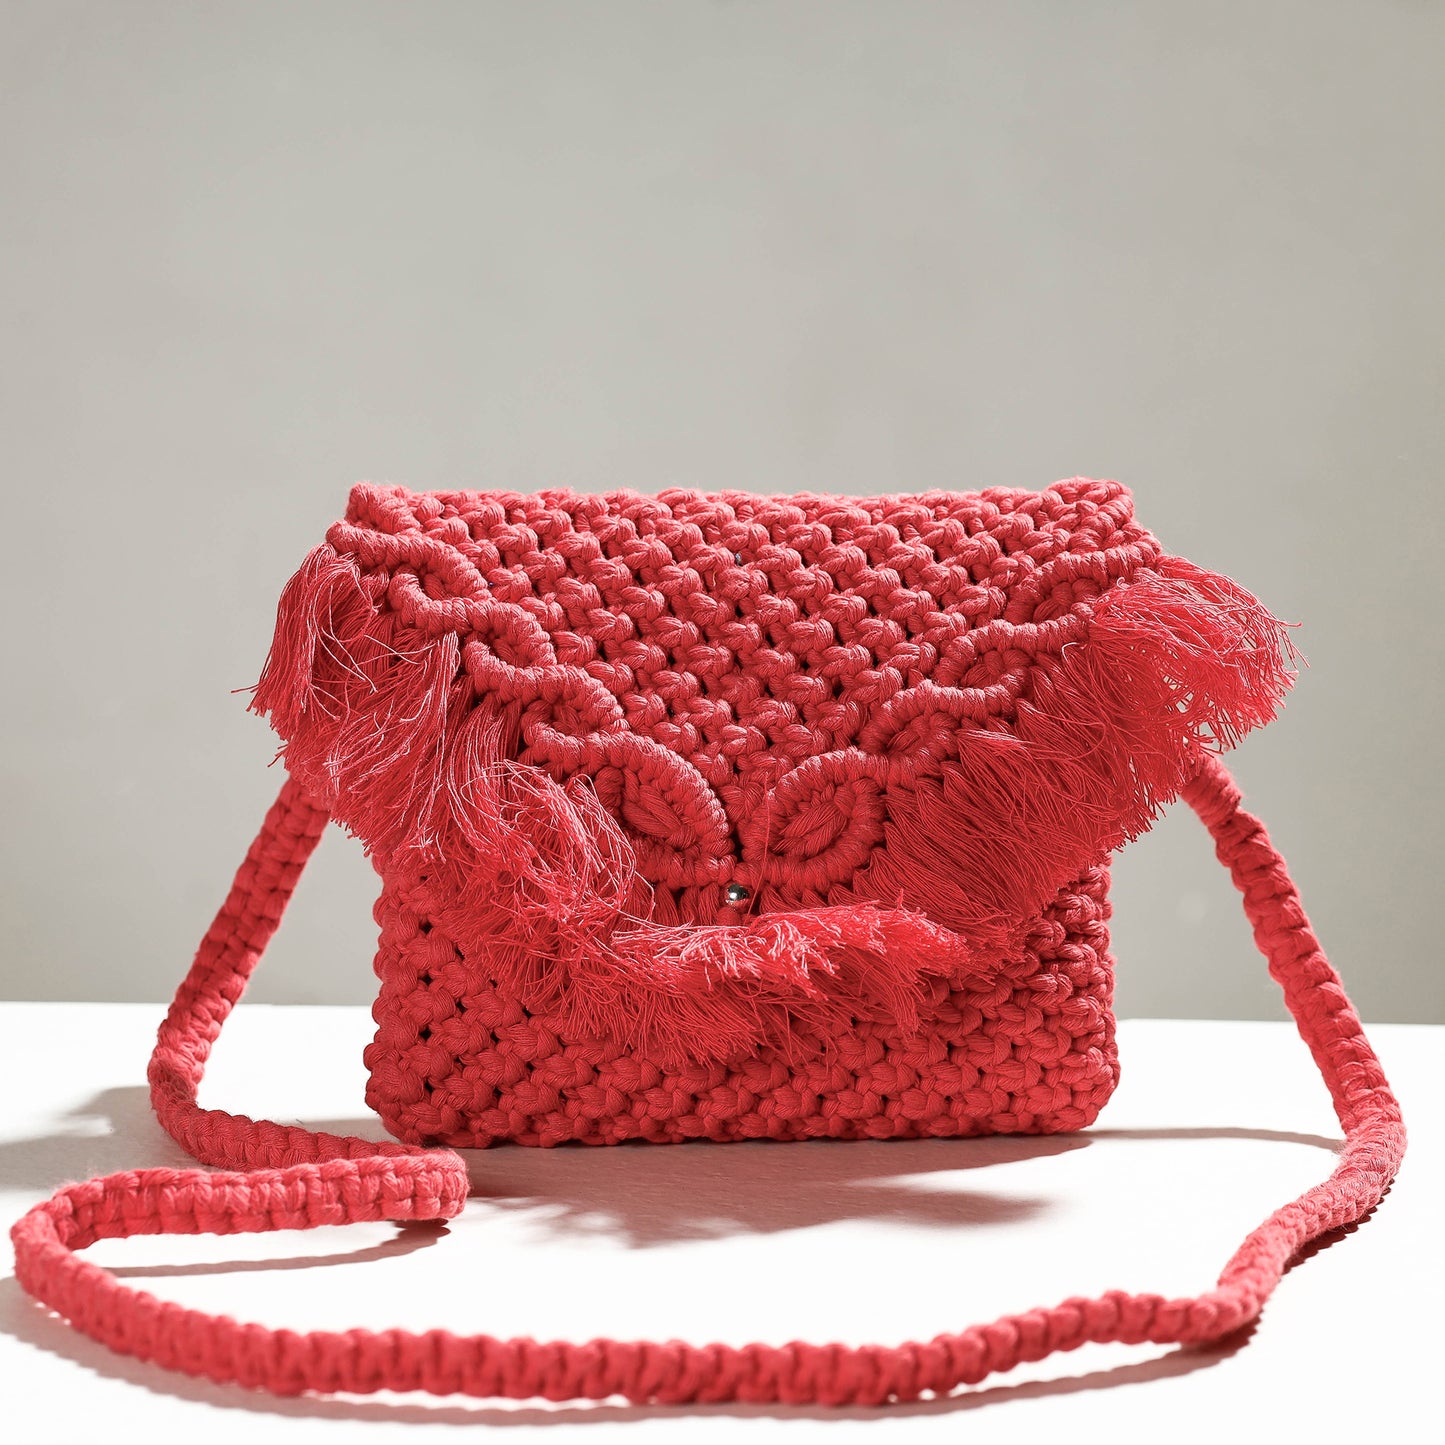 Red - Thread Work Handcrafted Macrame Sling Bag